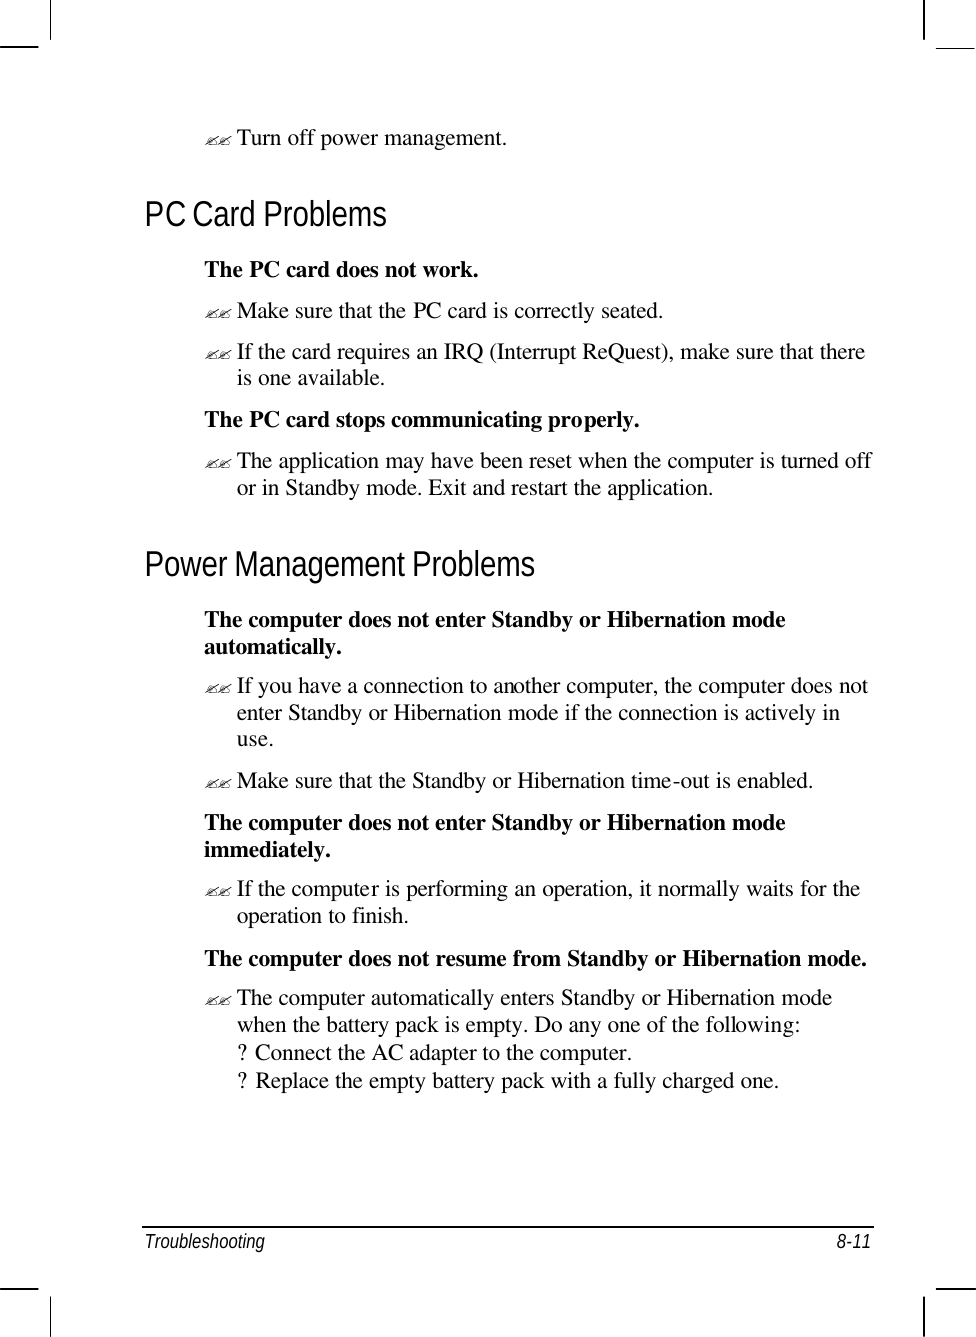  Troubleshooting 8-11 ?? Turn off power management. PC Card Problems The PC card does not work. ?? Make sure that the PC card is correctly seated. ?? If the card requires an IRQ (Interrupt ReQuest), make sure that there is one available. The PC card stops communicating properly. ?? The application may have been reset when the computer is turned off or in Standby mode. Exit and restart the application. Power Management Problems The computer does not enter Standby or Hibernation mode automatically. ?? If you have a connection to another computer, the computer does not enter Standby or Hibernation mode if the connection is actively in use. ?? Make sure that the Standby or Hibernation time-out is enabled. The computer does not enter Standby or Hibernation mode immediately. ?? If the computer is performing an operation, it normally waits for the operation to finish. The computer does not resume from Standby or Hibernation mode. ?? The computer automatically enters Standby or Hibernation mode when the battery pack is empty. Do any one of the following: ? Connect the AC adapter to the computer. ? Replace the empty battery pack with a fully charged one. 